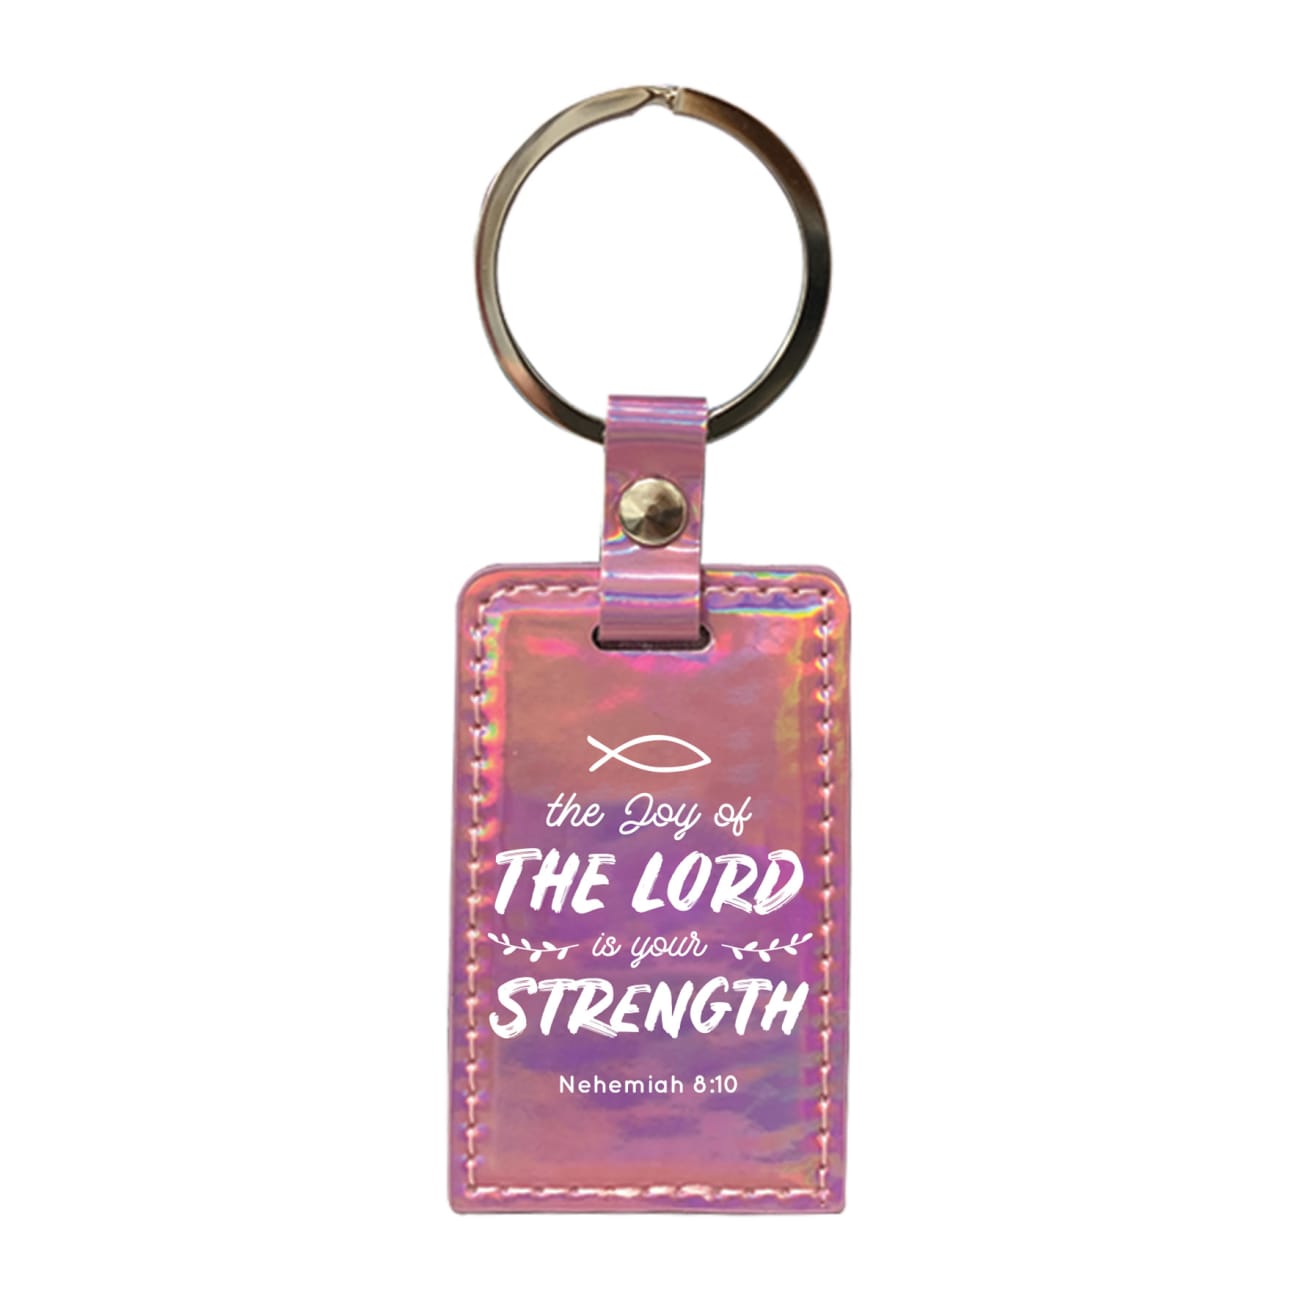 Iridescent Keyring: The Joy of the Lord is Our Strength, Nehemiah 8:10 Jewellery